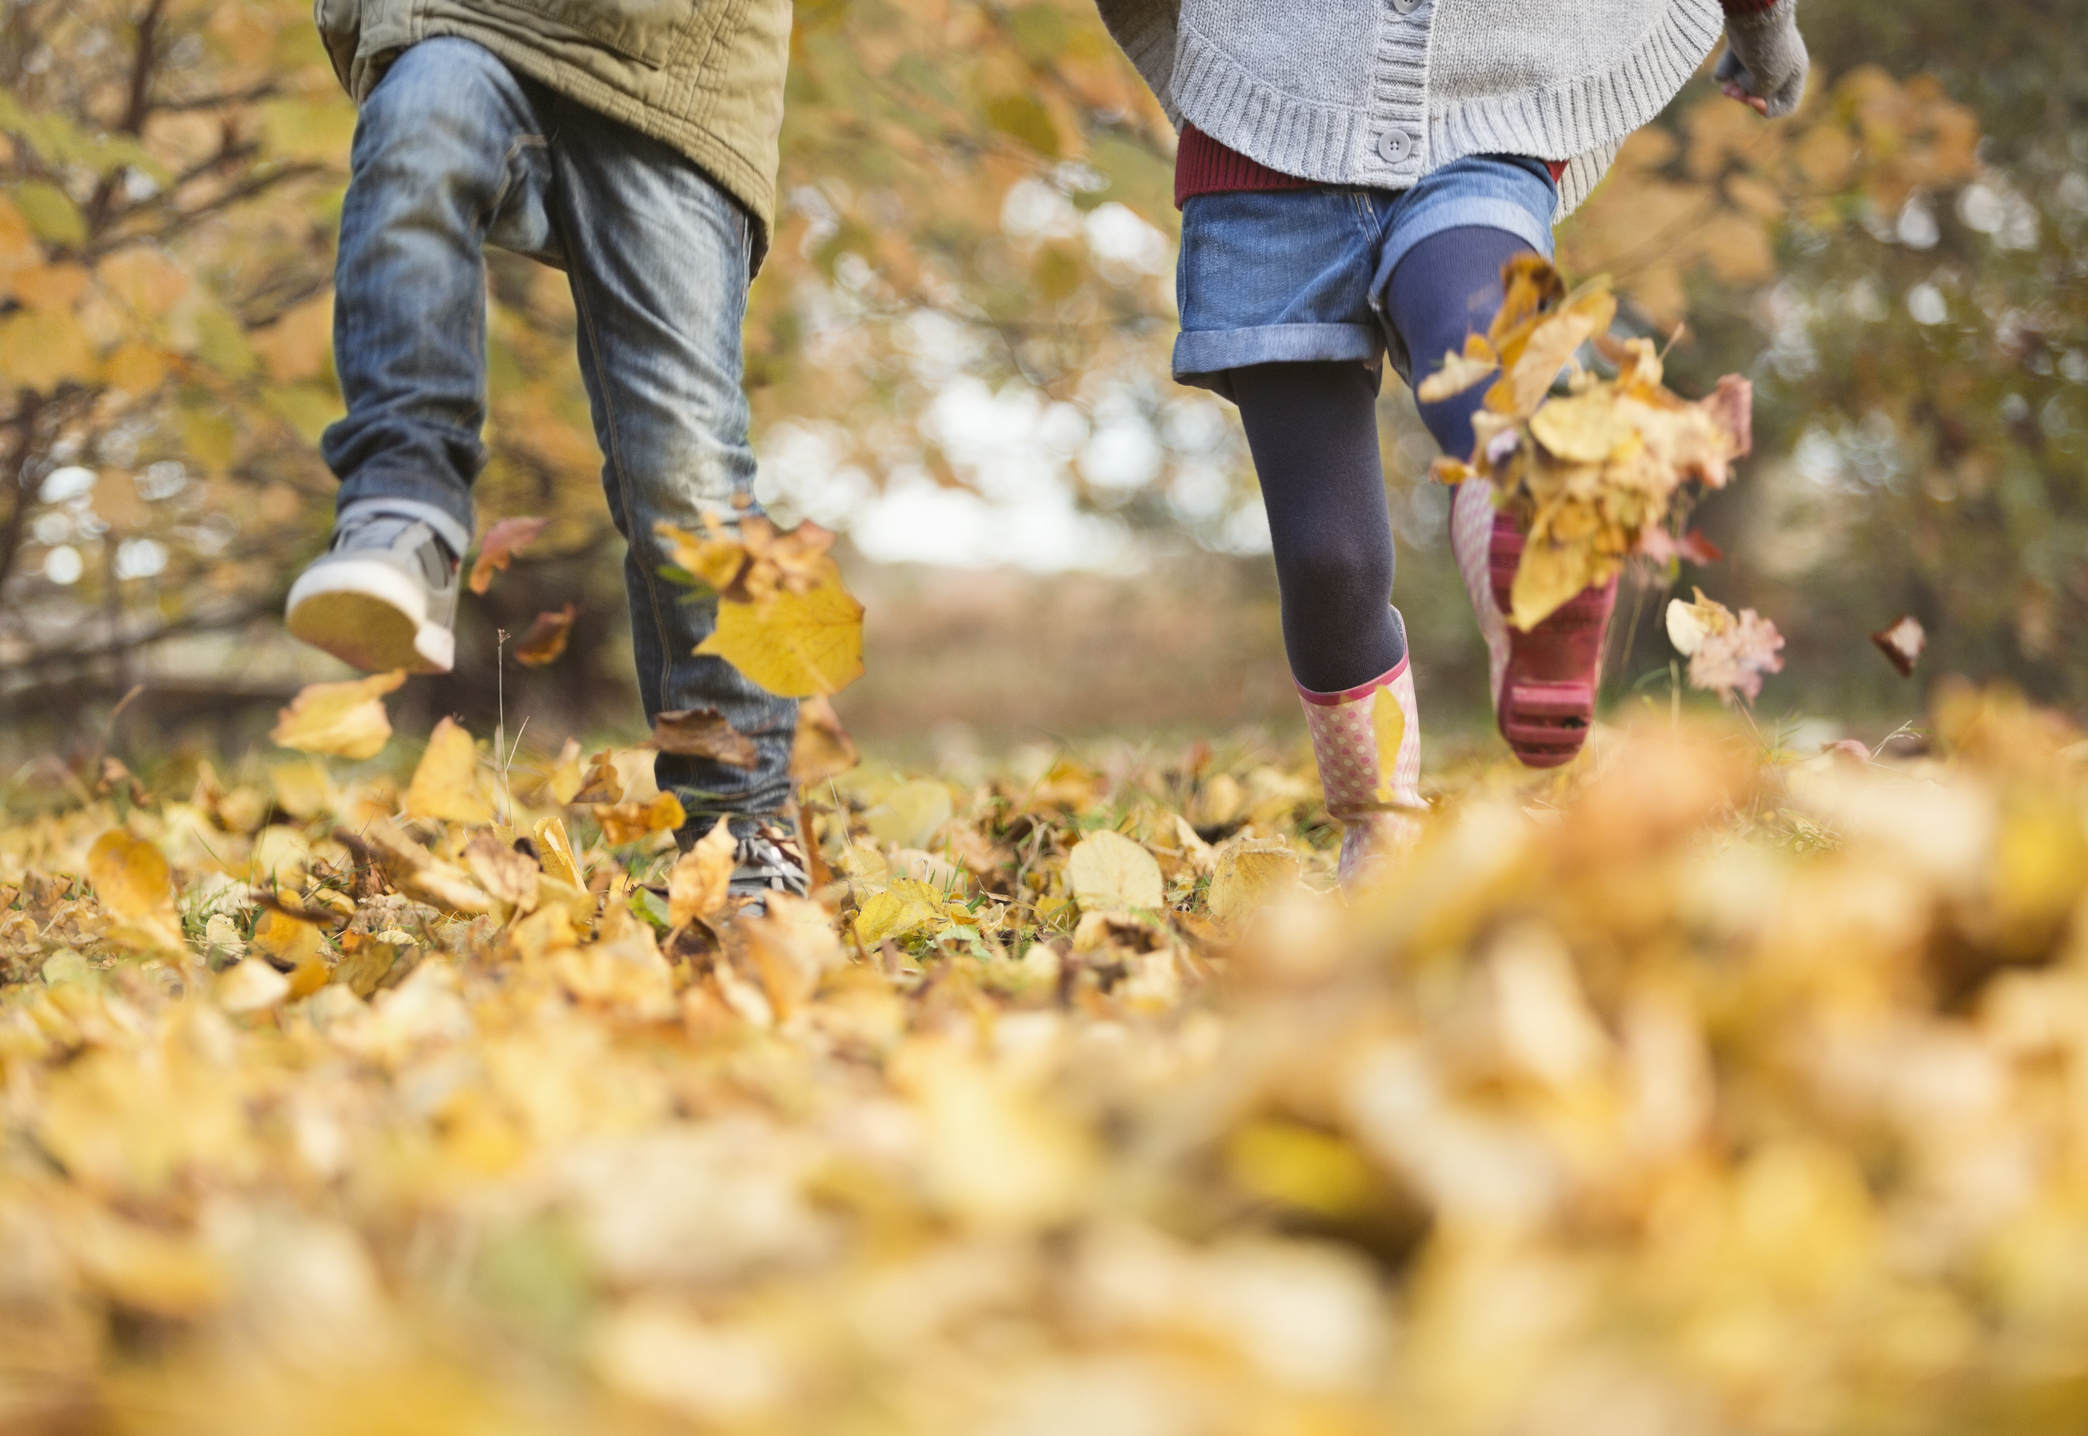 Autumn Facts for Kids